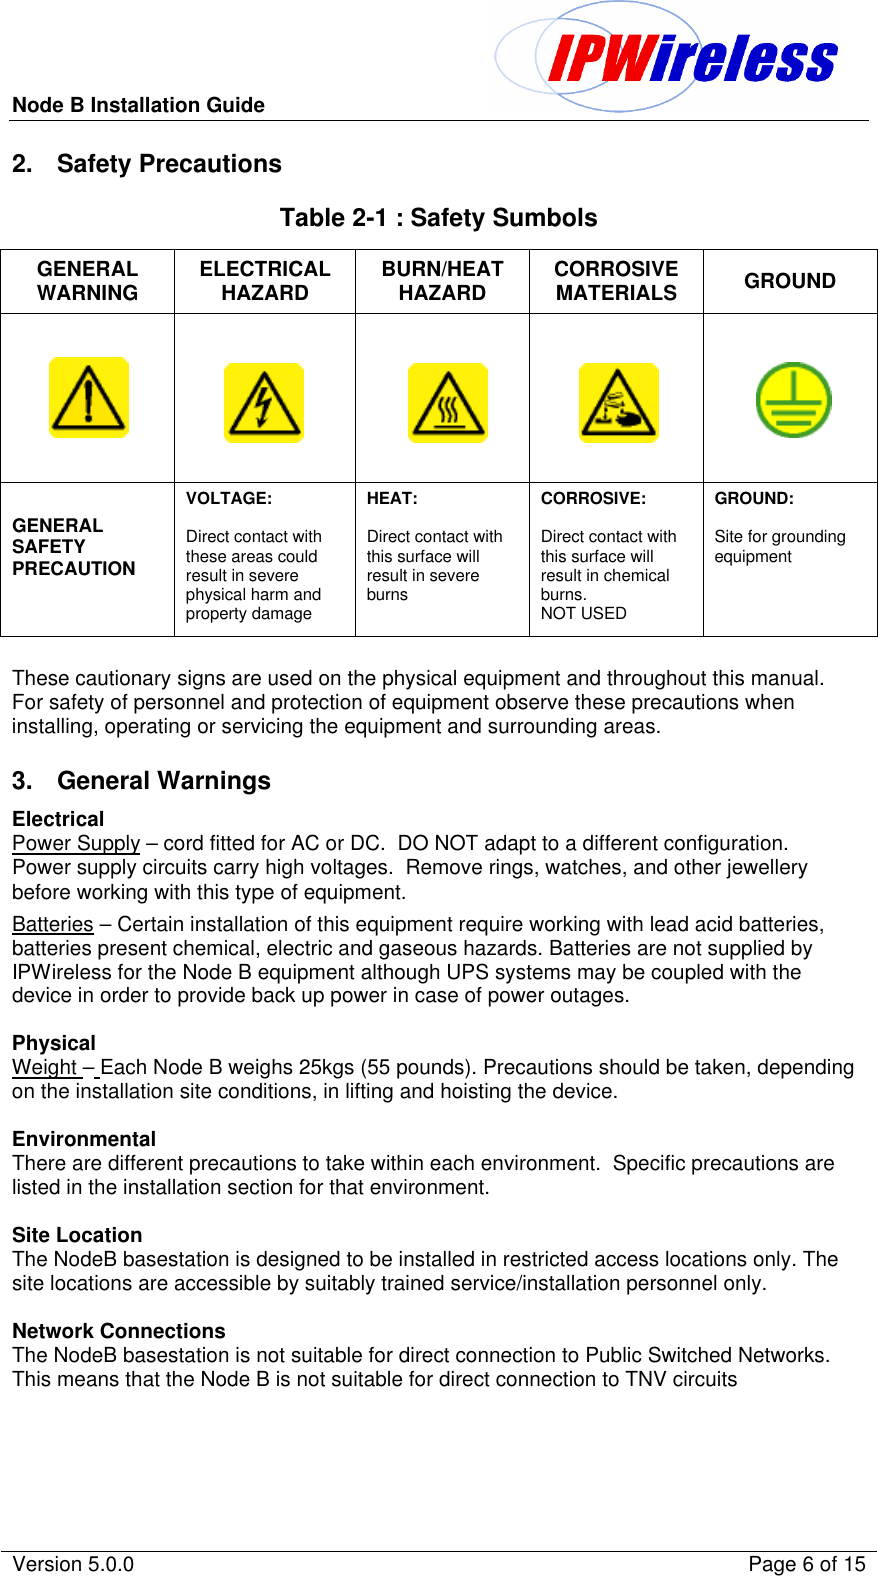 Node B Installation Guide                                               Version 5.0.0    Page 6 of 15  2. Safety Precautions Table 2-1 : Safety Sumbols GENERAL WARNING ELECTRICAL HAZARD BURN/HEAT HAZARD CORROSIVE MATERIALS GROUND          GENERAL SAFETY PRECAUTION  VOLTAGE:  Direct contact with these areas could result in severe physical harm and property damage HEAT:   Direct contact with this surface will result in severe burns CORROSIVE:  Direct contact with this surface will result in chemical burns. NOT USED GROUND:  Site for grounding equipment  These cautionary signs are used on the physical equipment and throughout this manual.  For safety of personnel and protection of equipment observe these precautions when installing, operating or servicing the equipment and surrounding areas.  3. General Warnings Electrical Power Supply – cord fitted for AC or DC.  DO NOT adapt to a different configuration. Power supply circuits carry high voltages.  Remove rings, watches, and other jewellery before working with this type of equipment. Batteries – Certain installation of this equipment require working with lead acid batteries, batteries present chemical, electric and gaseous hazards. Batteries are not supplied by IPWireless for the Node B equipment although UPS systems may be coupled with the device in order to provide back up power in case of power outages.  Physical Weight – Each Node B weighs 25kgs (55 pounds). Precautions should be taken, depending on the installation site conditions, in lifting and hoisting the device.  Environmental There are different precautions to take within each environment.  Specific precautions are listed in the installation section for that environment.  Site Location The NodeB basestation is designed to be installed in restricted access locations only. The site locations are accessible by suitably trained service/installation personnel only.  Network Connections The NodeB basestation is not suitable for direct connection to Public Switched Networks. This means that the Node B is not suitable for direct connection to TNV circuits 